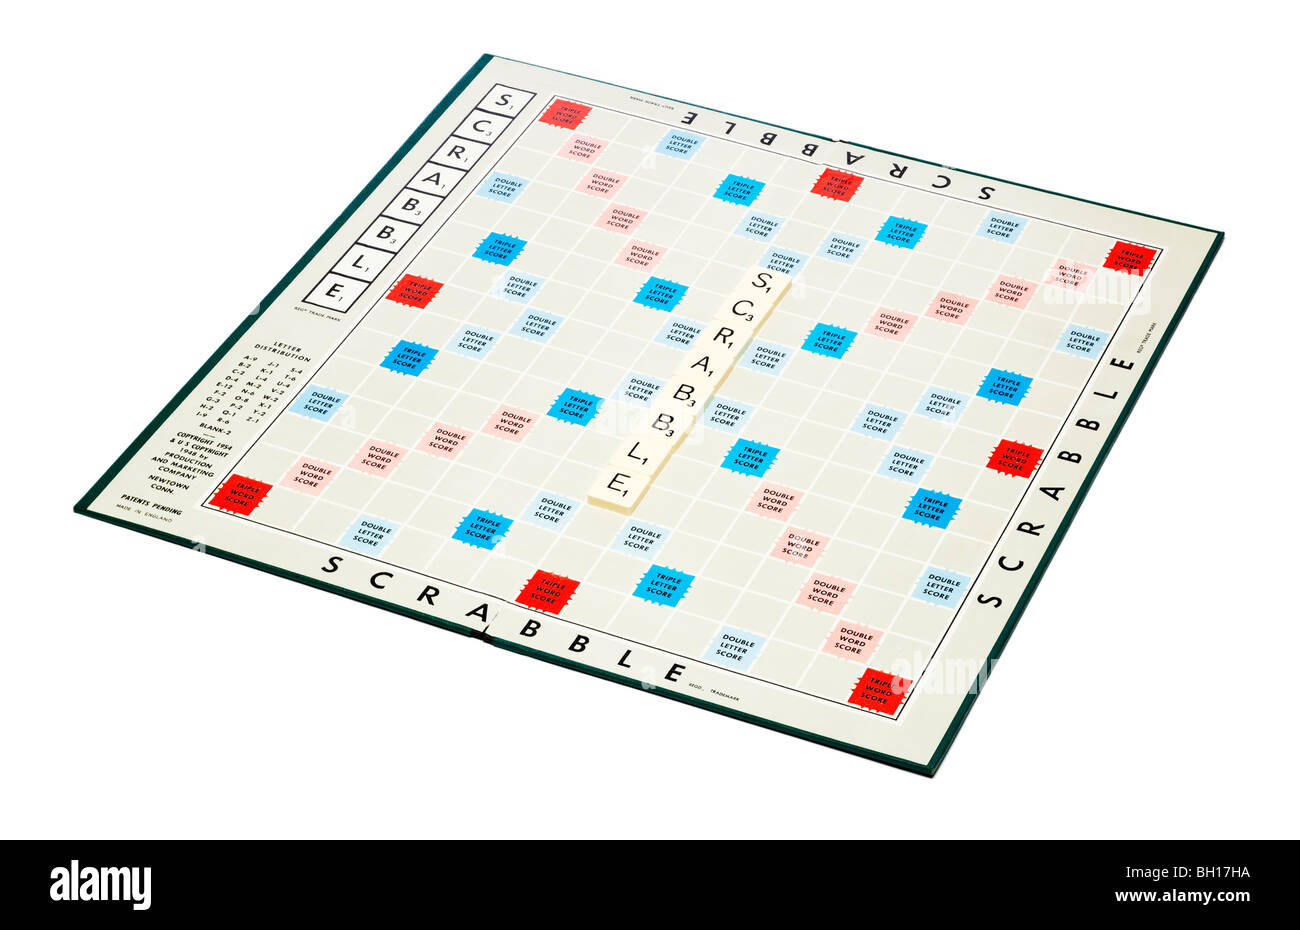 Scrabble game board with scrabble spelled out, cut out on white background Stock Photo